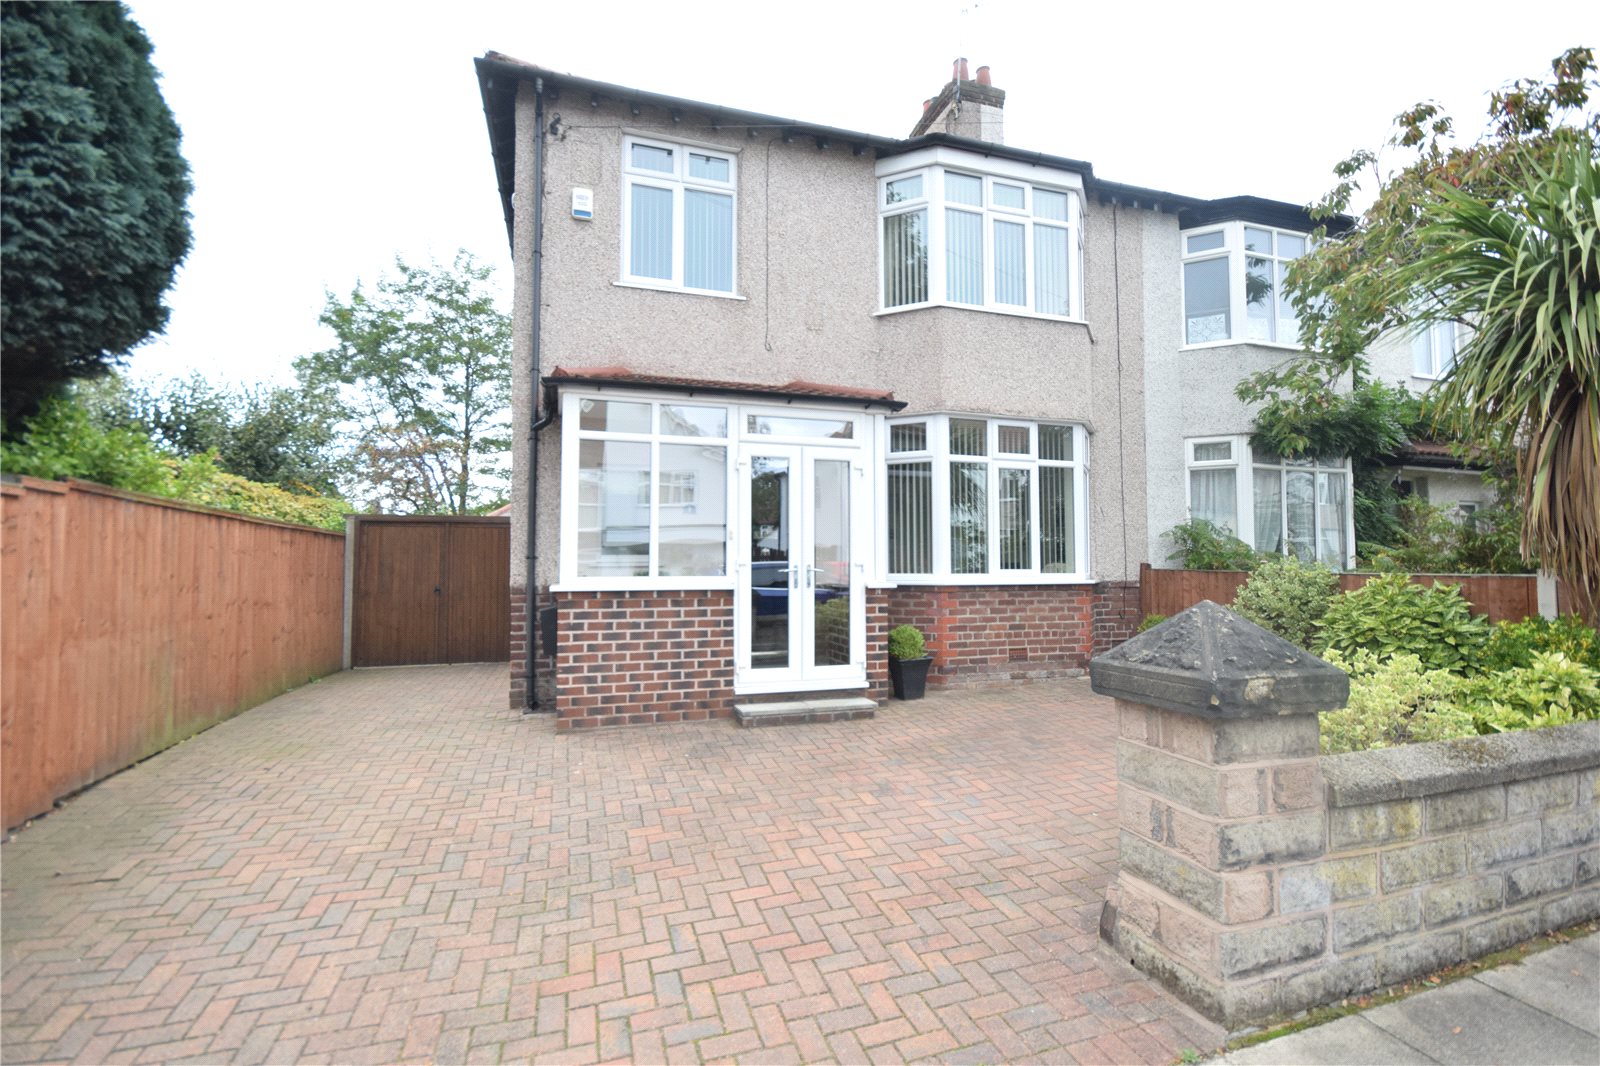 Towers Road, Childwall, Liverpool, L16 8NT